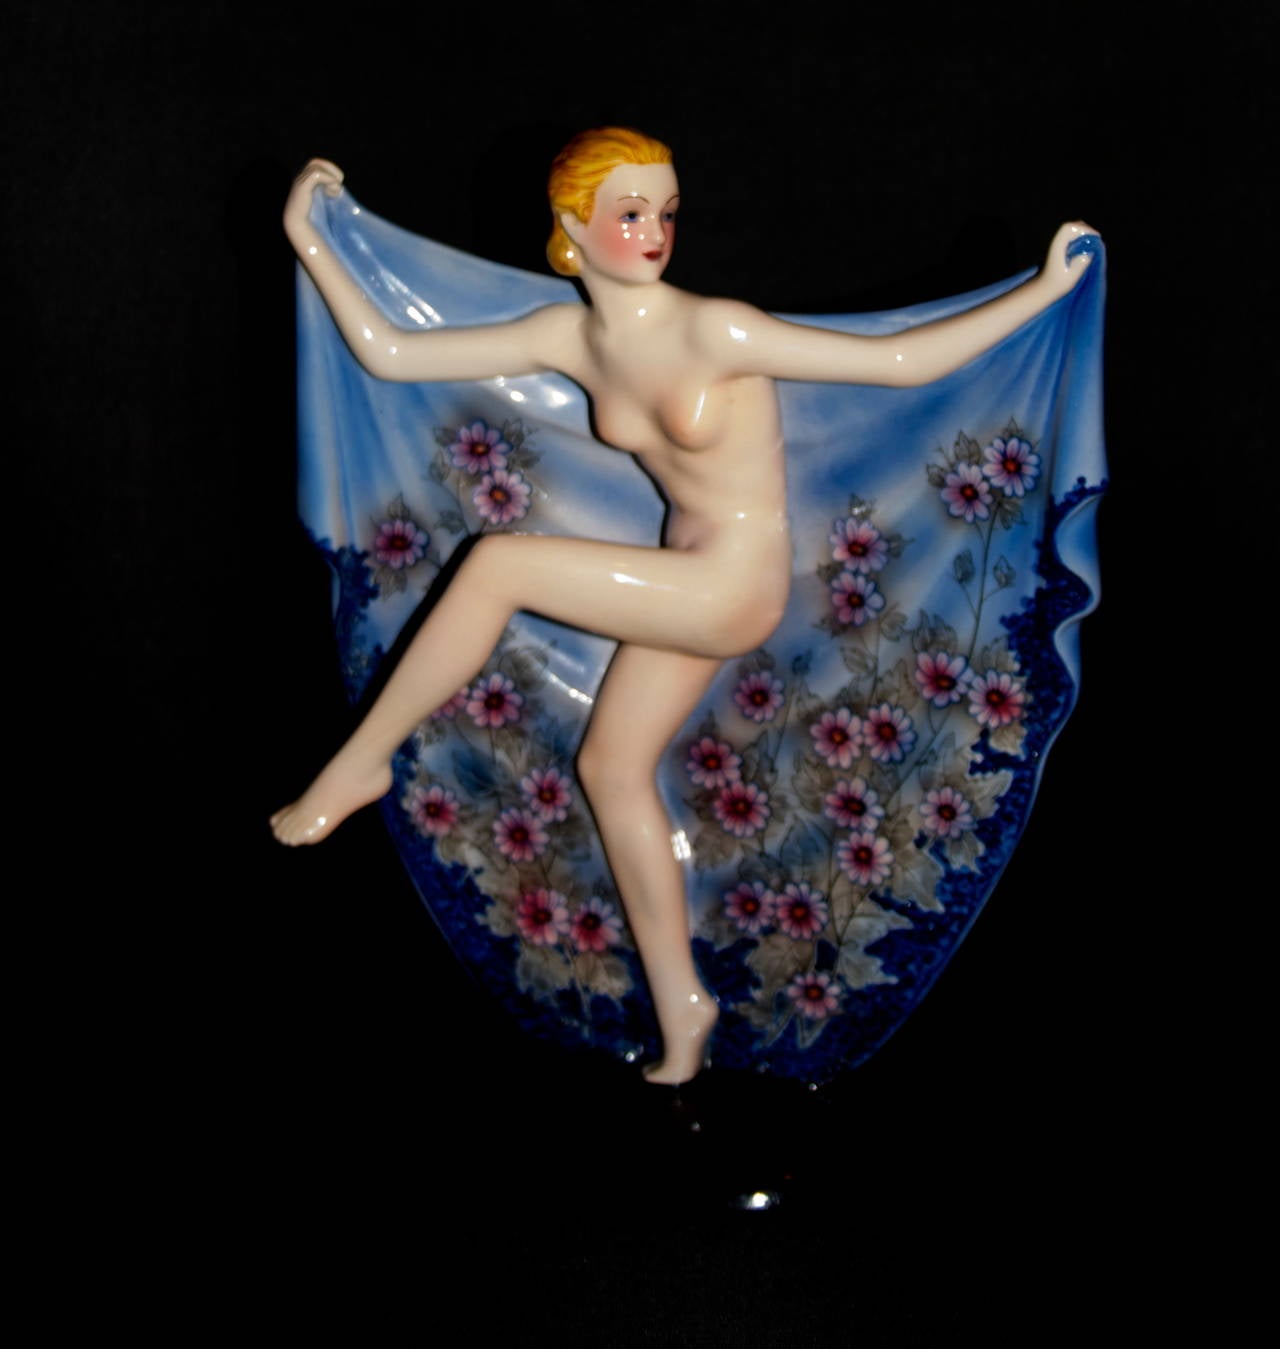 A Beautiful and rare art deco figure by Josef Lorenzl for Keramos ceramics
This is a large figure and features a nude dancer holding open her cape.
Hand painted in a sky blue color and featuring hand raised red flowers.
Josef Lorenz worked for